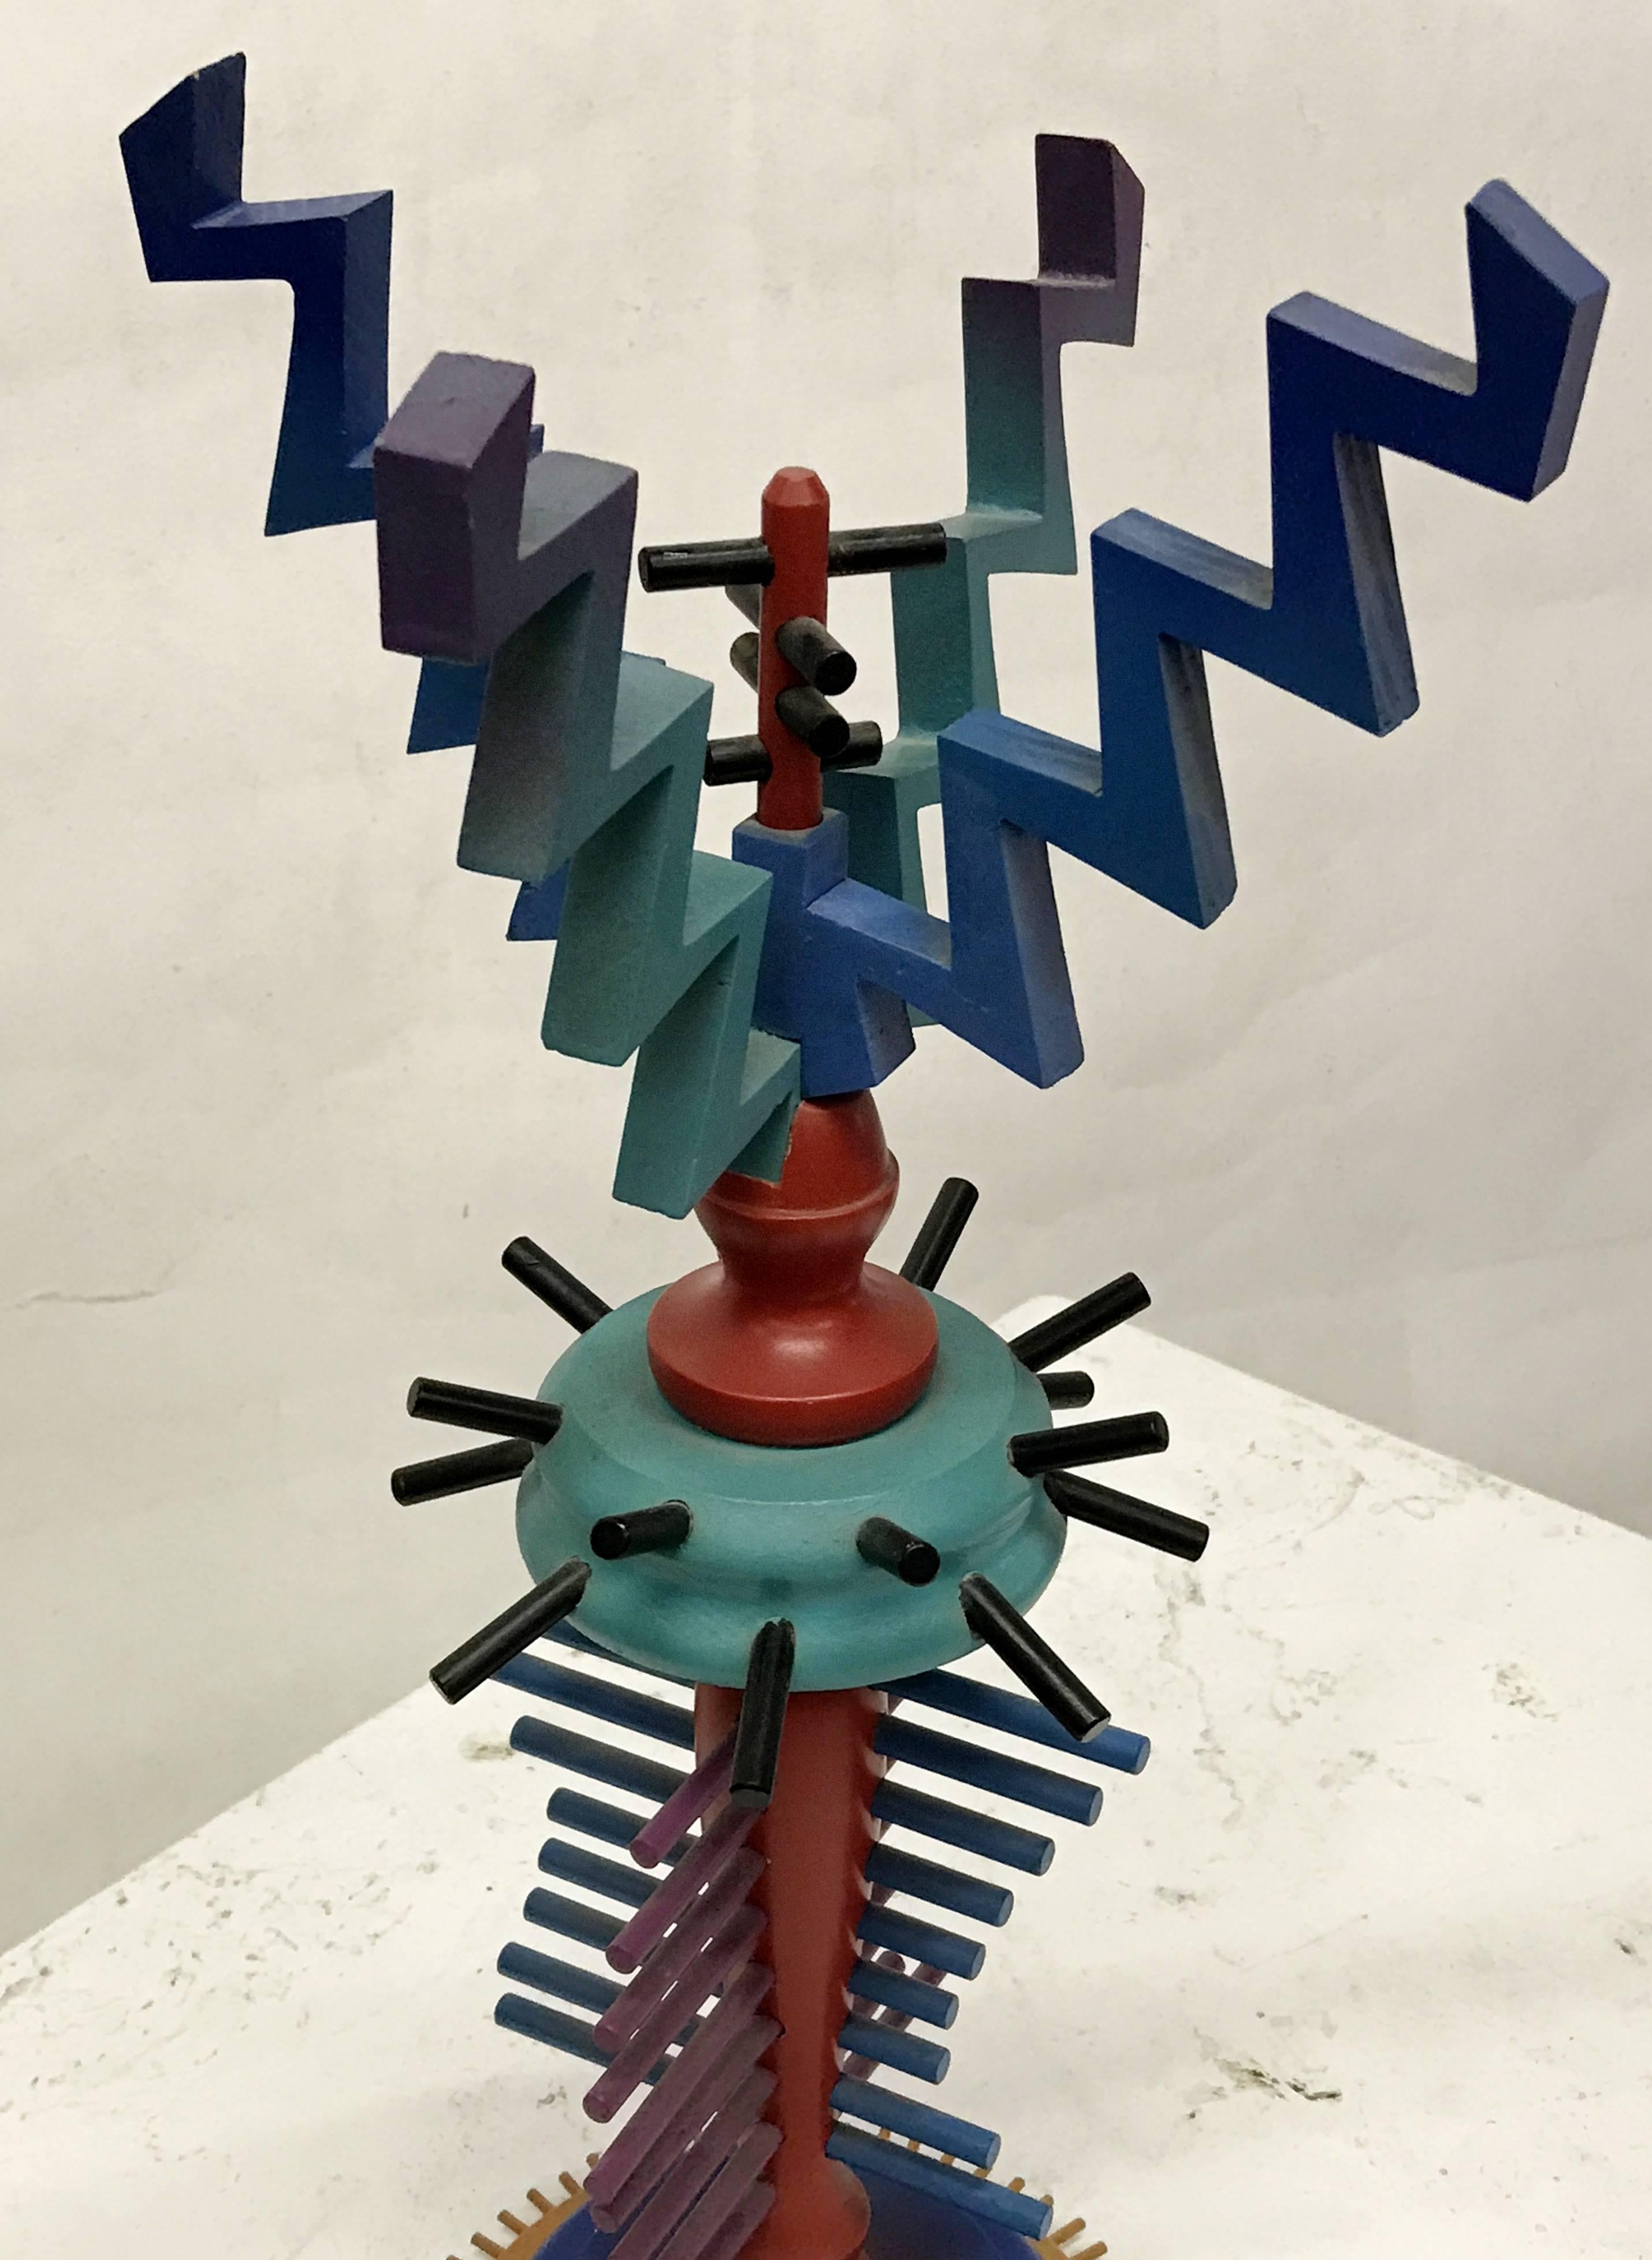 Colorful sculpture in the 1980s Memphis style attributed to Max Finkelstein. Sculpture is lightweight and made up of painted wooden geometric shapes. Acquired directly from the late artist's estate.